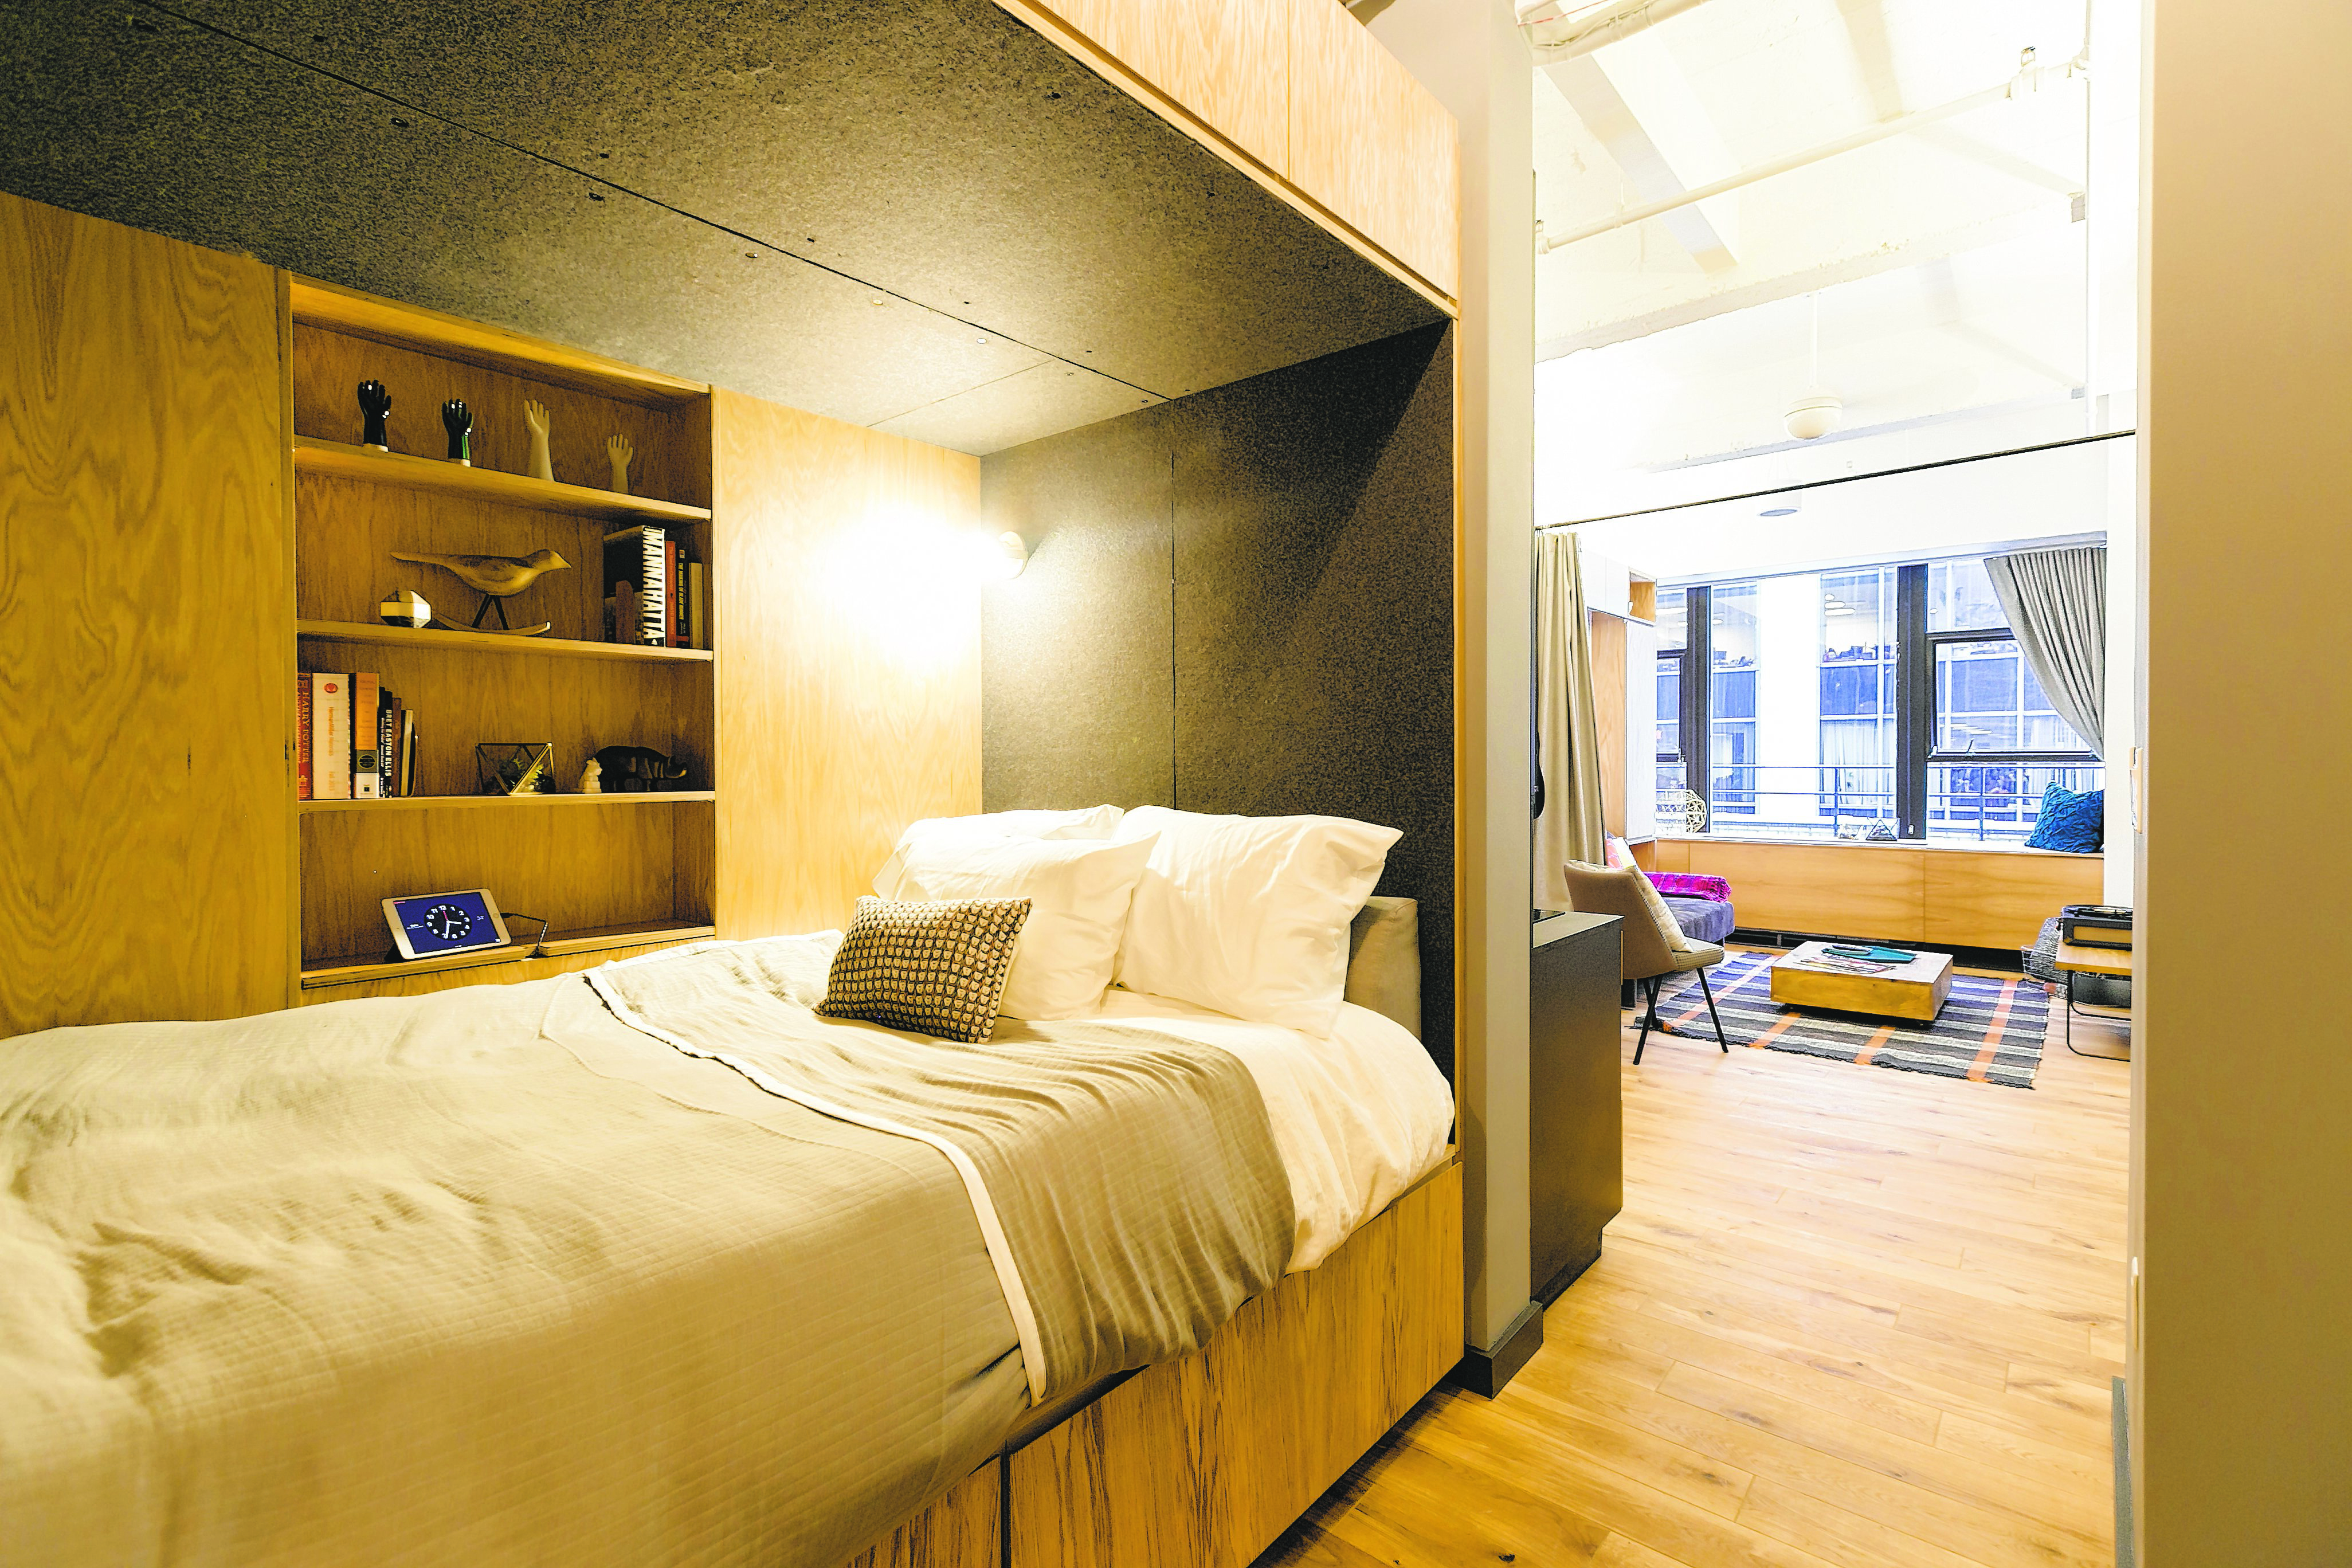 You’ll soon be able to bunk up in a co-living dorm like this one, if you’re yearning for your college years. Photo by Lauren Kallen/WeWork 